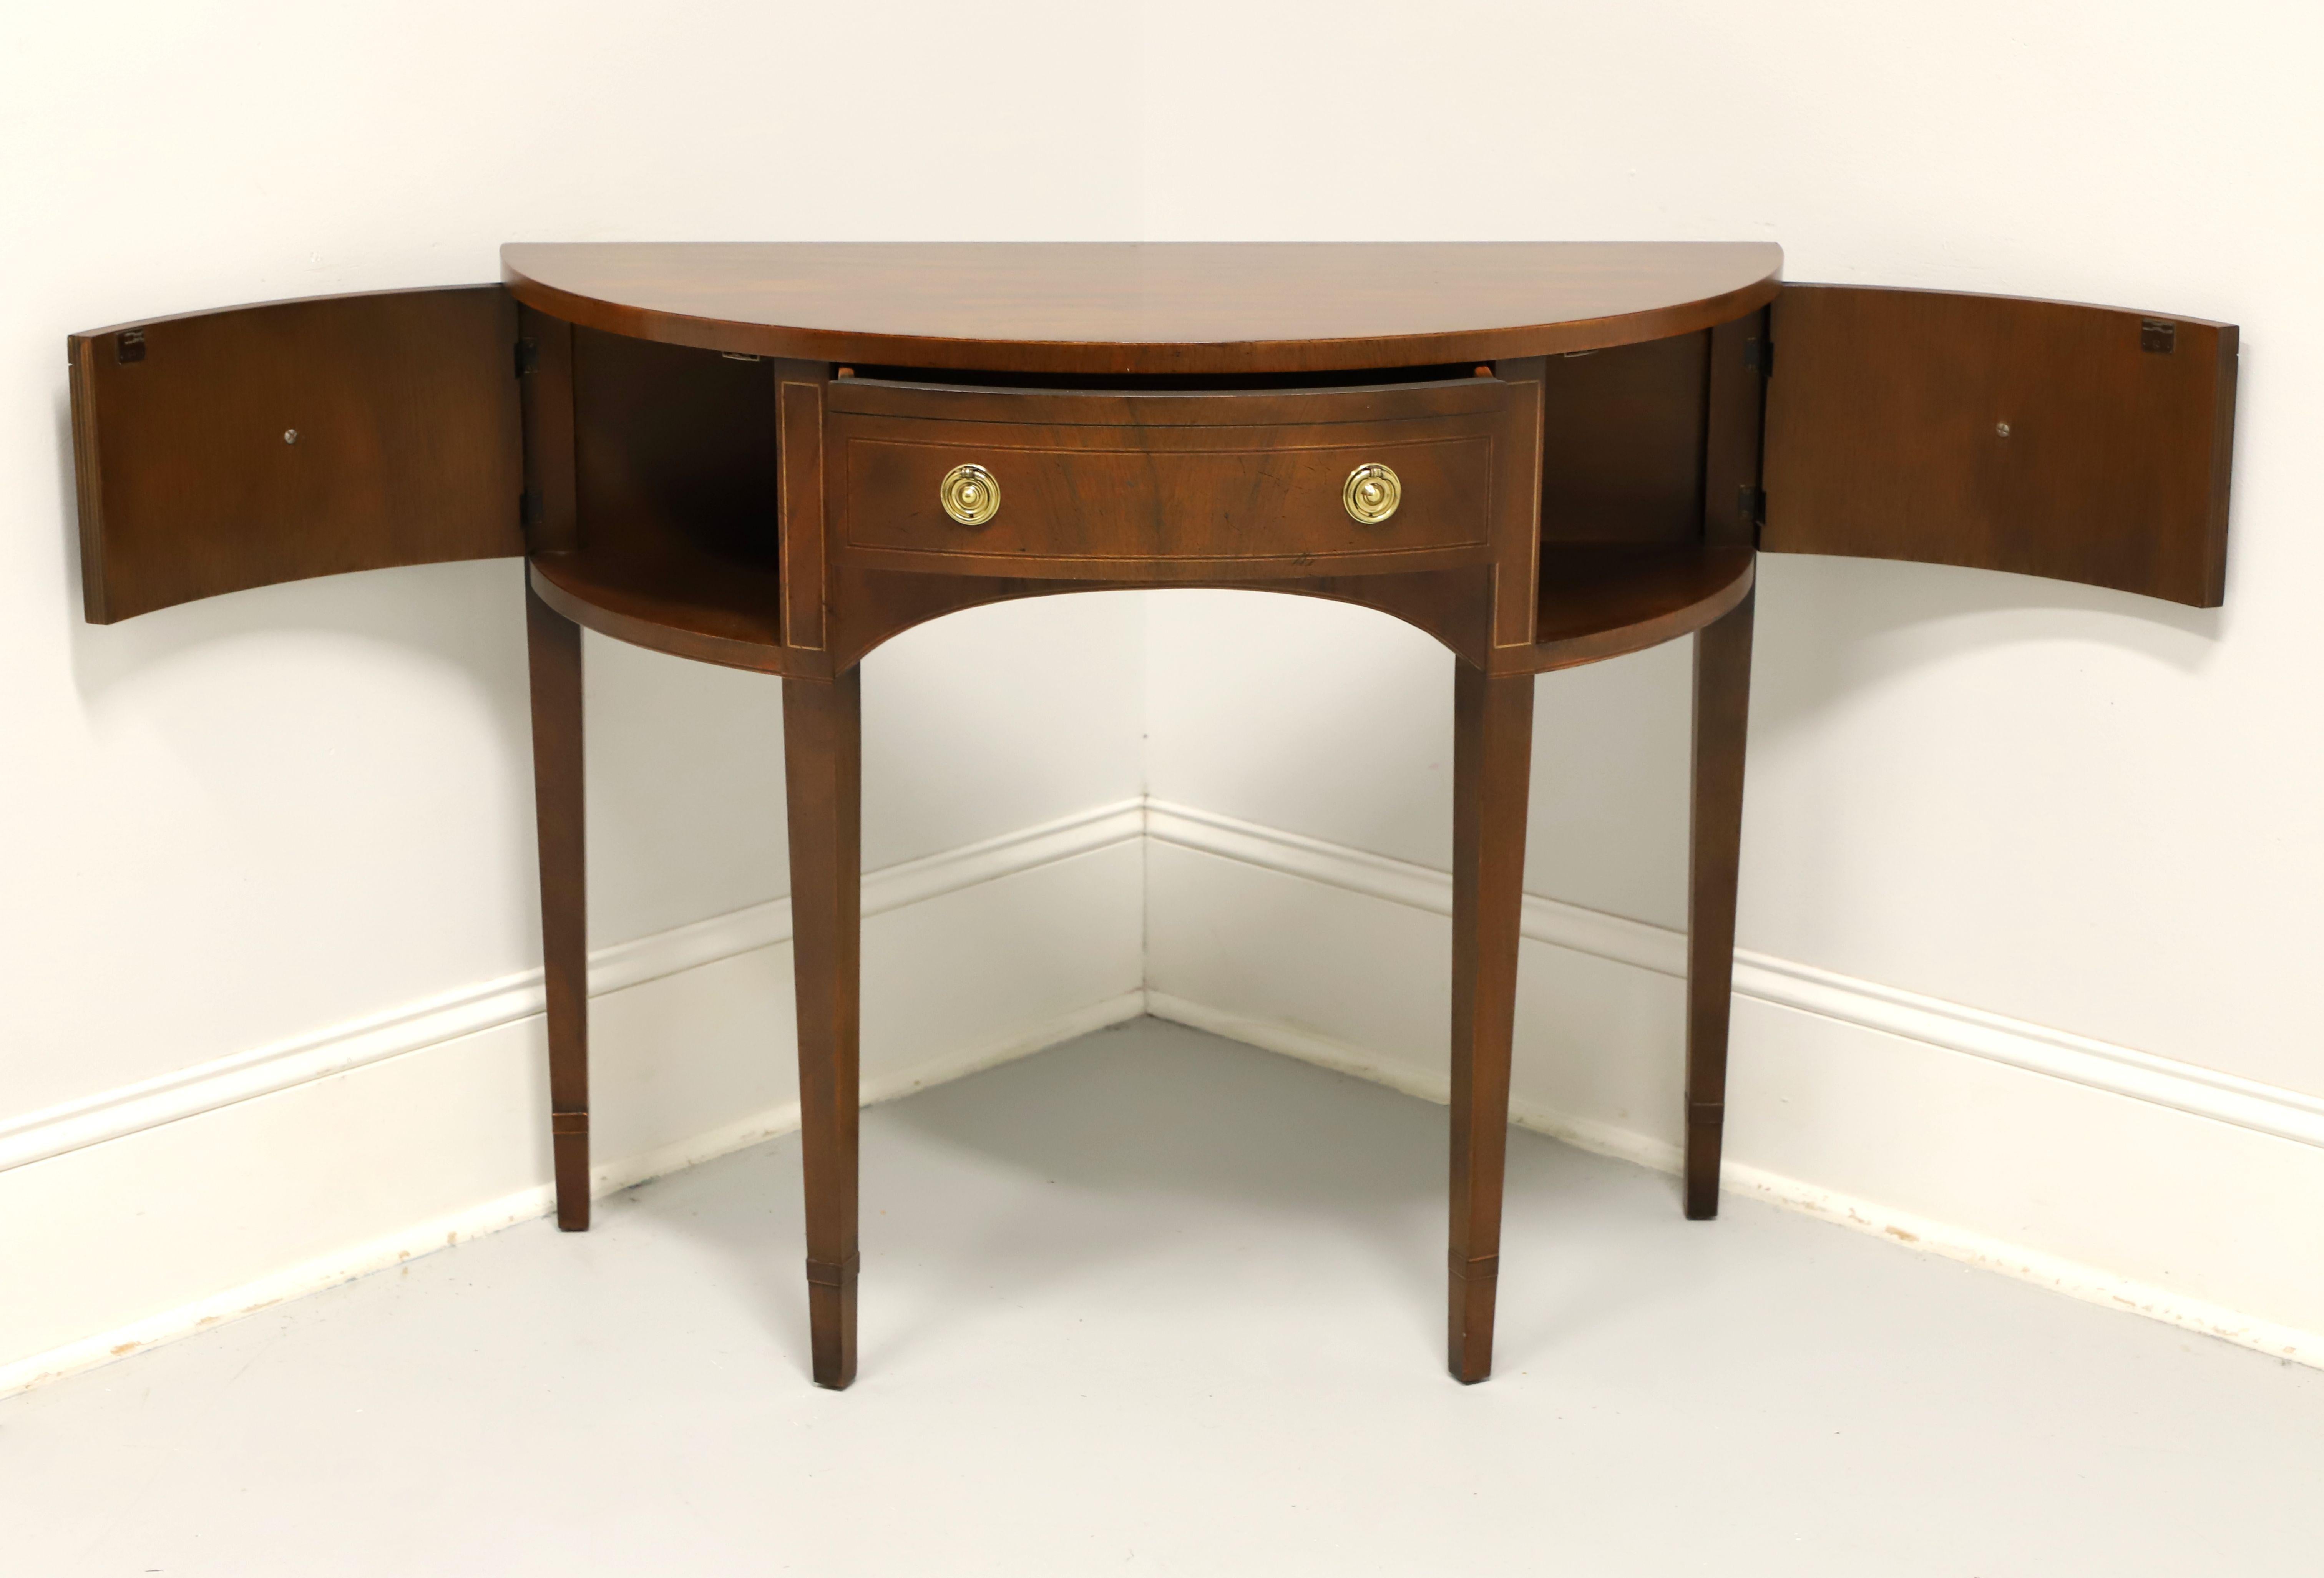 Brass BAKER Inlaid Mahogany Hepplewhite Demilune Console Table / Server - A